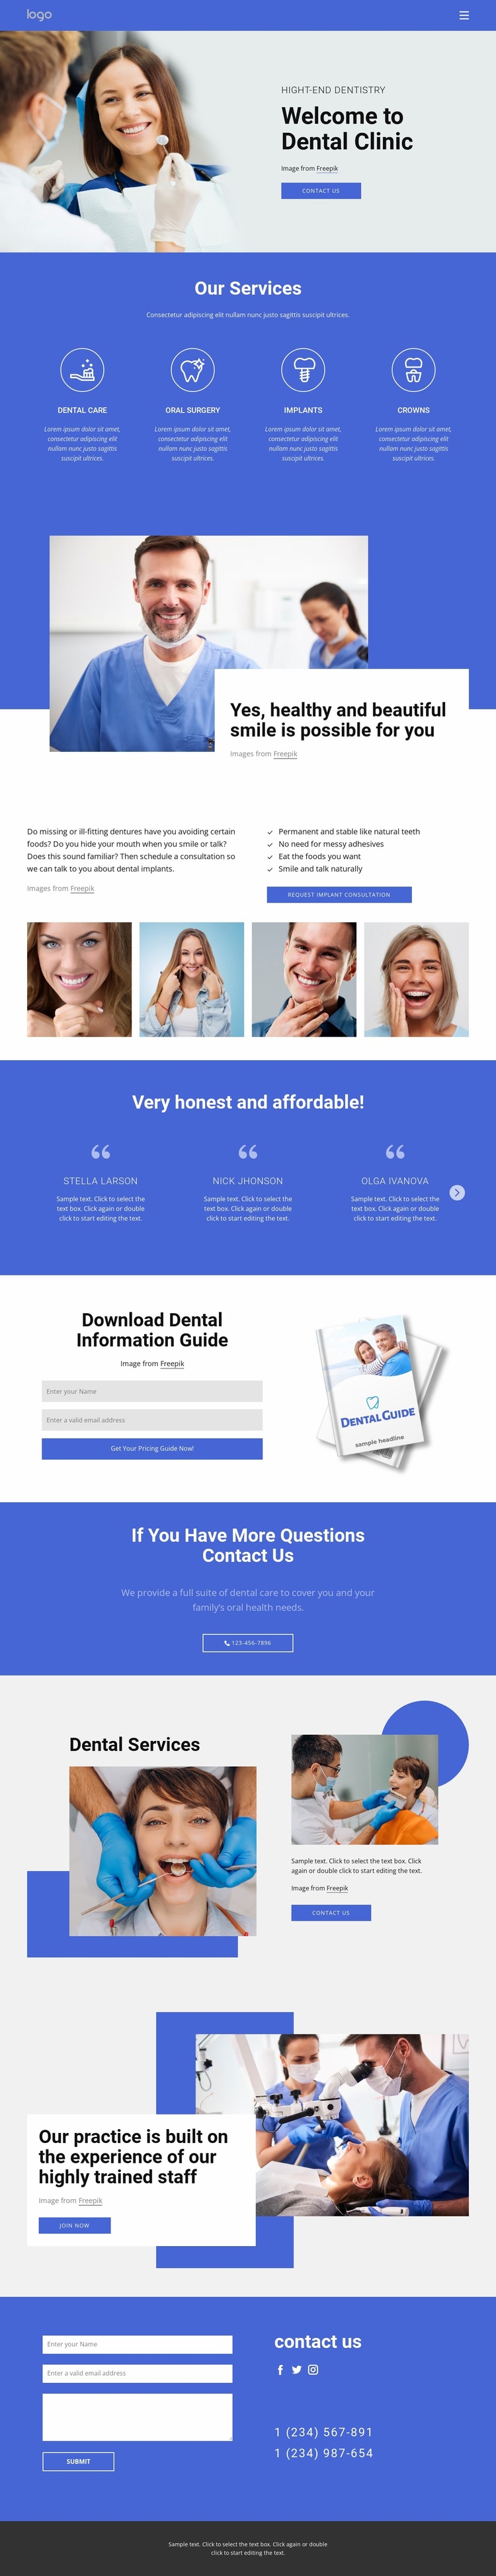 Welcome to dental clinic eCommerce Template